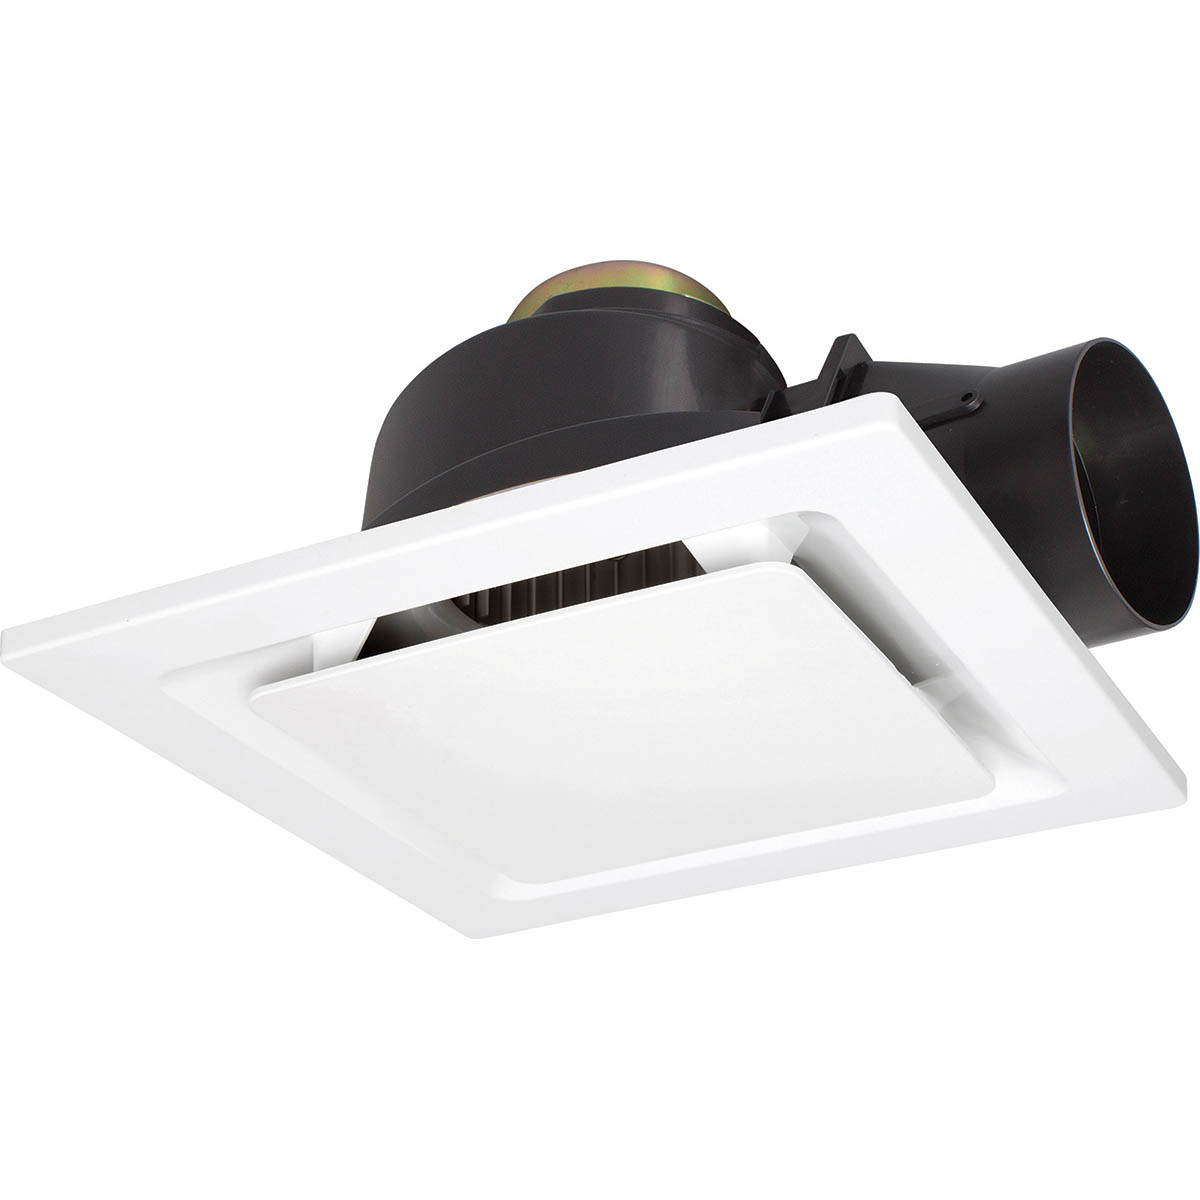 Sarico Ii Large Exhaust Fan Brilliant Lighting within size 1200 X 1200